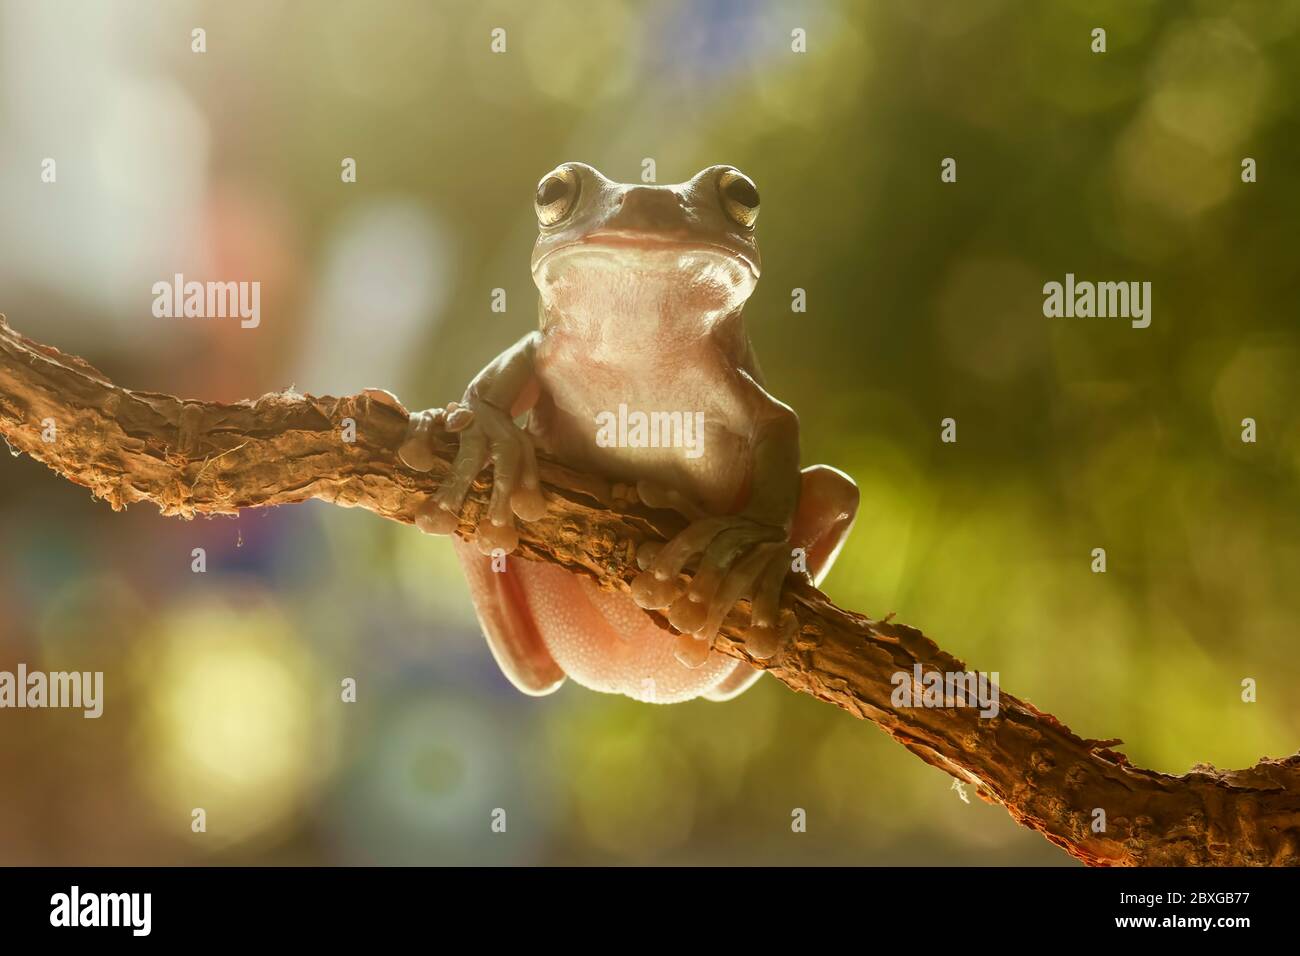 Close-up of a dumpy tree frog on a branch, Indonesia Stock Photo